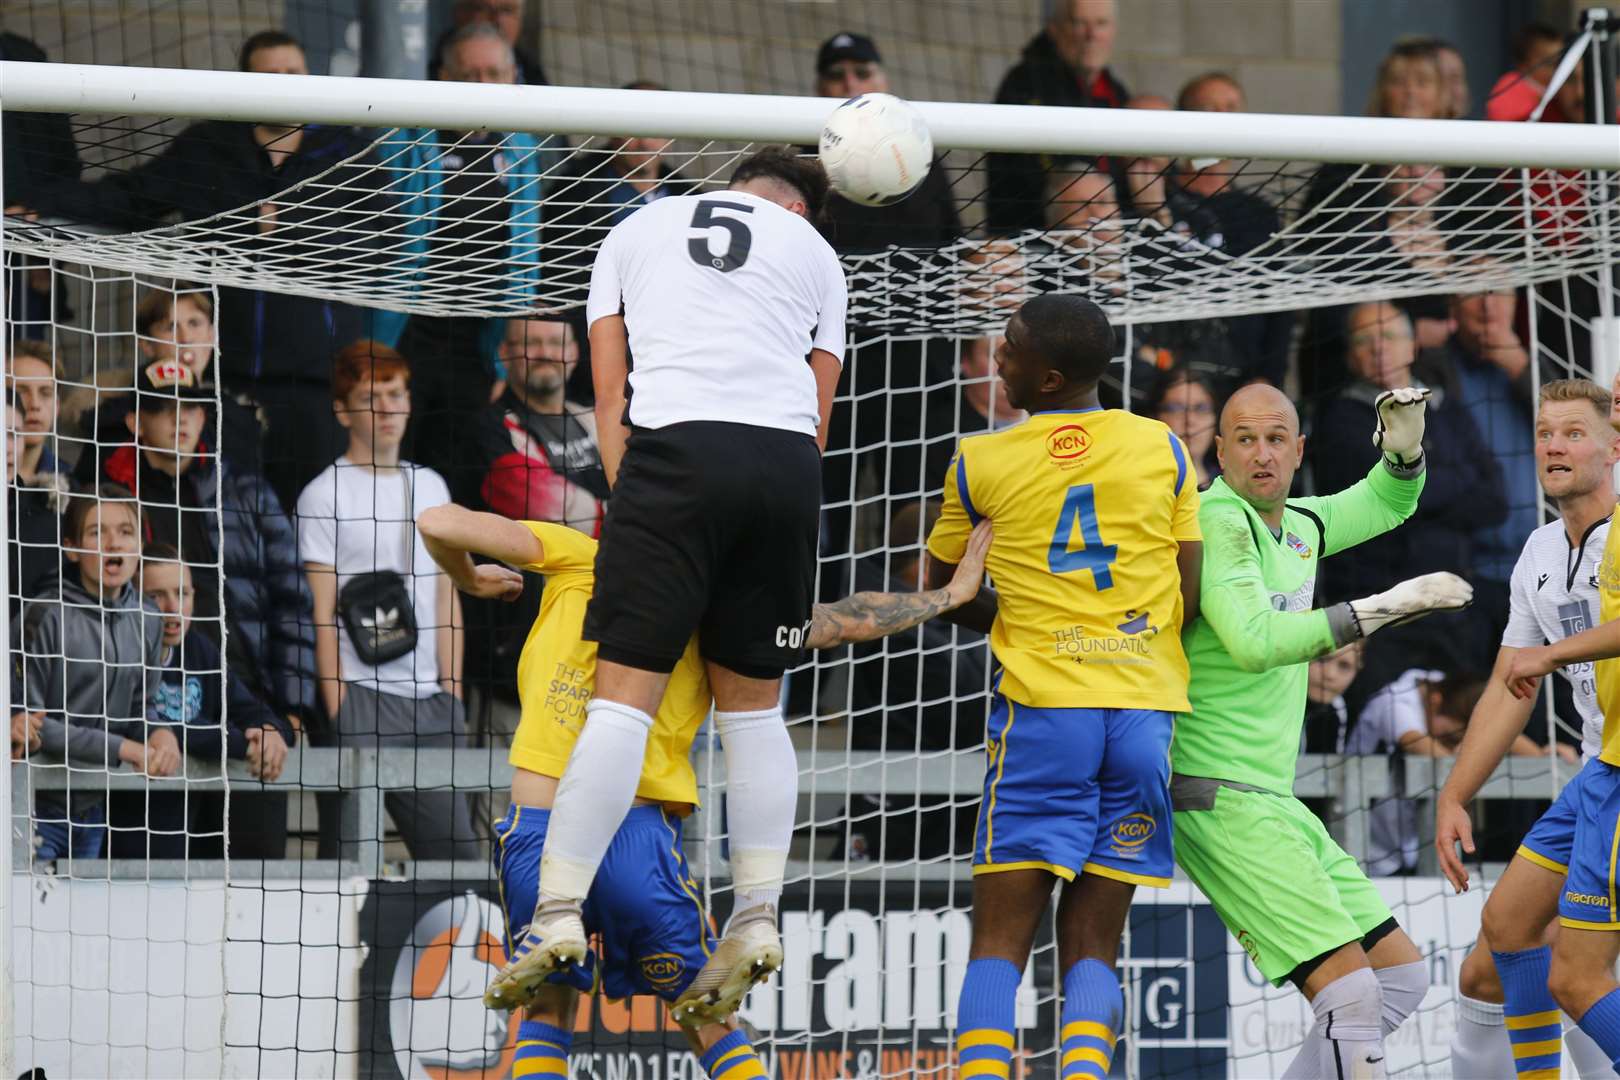 Dartford's Ronnie Vint is unable to convert this header against Kingstonian. Picture: Andy Jones